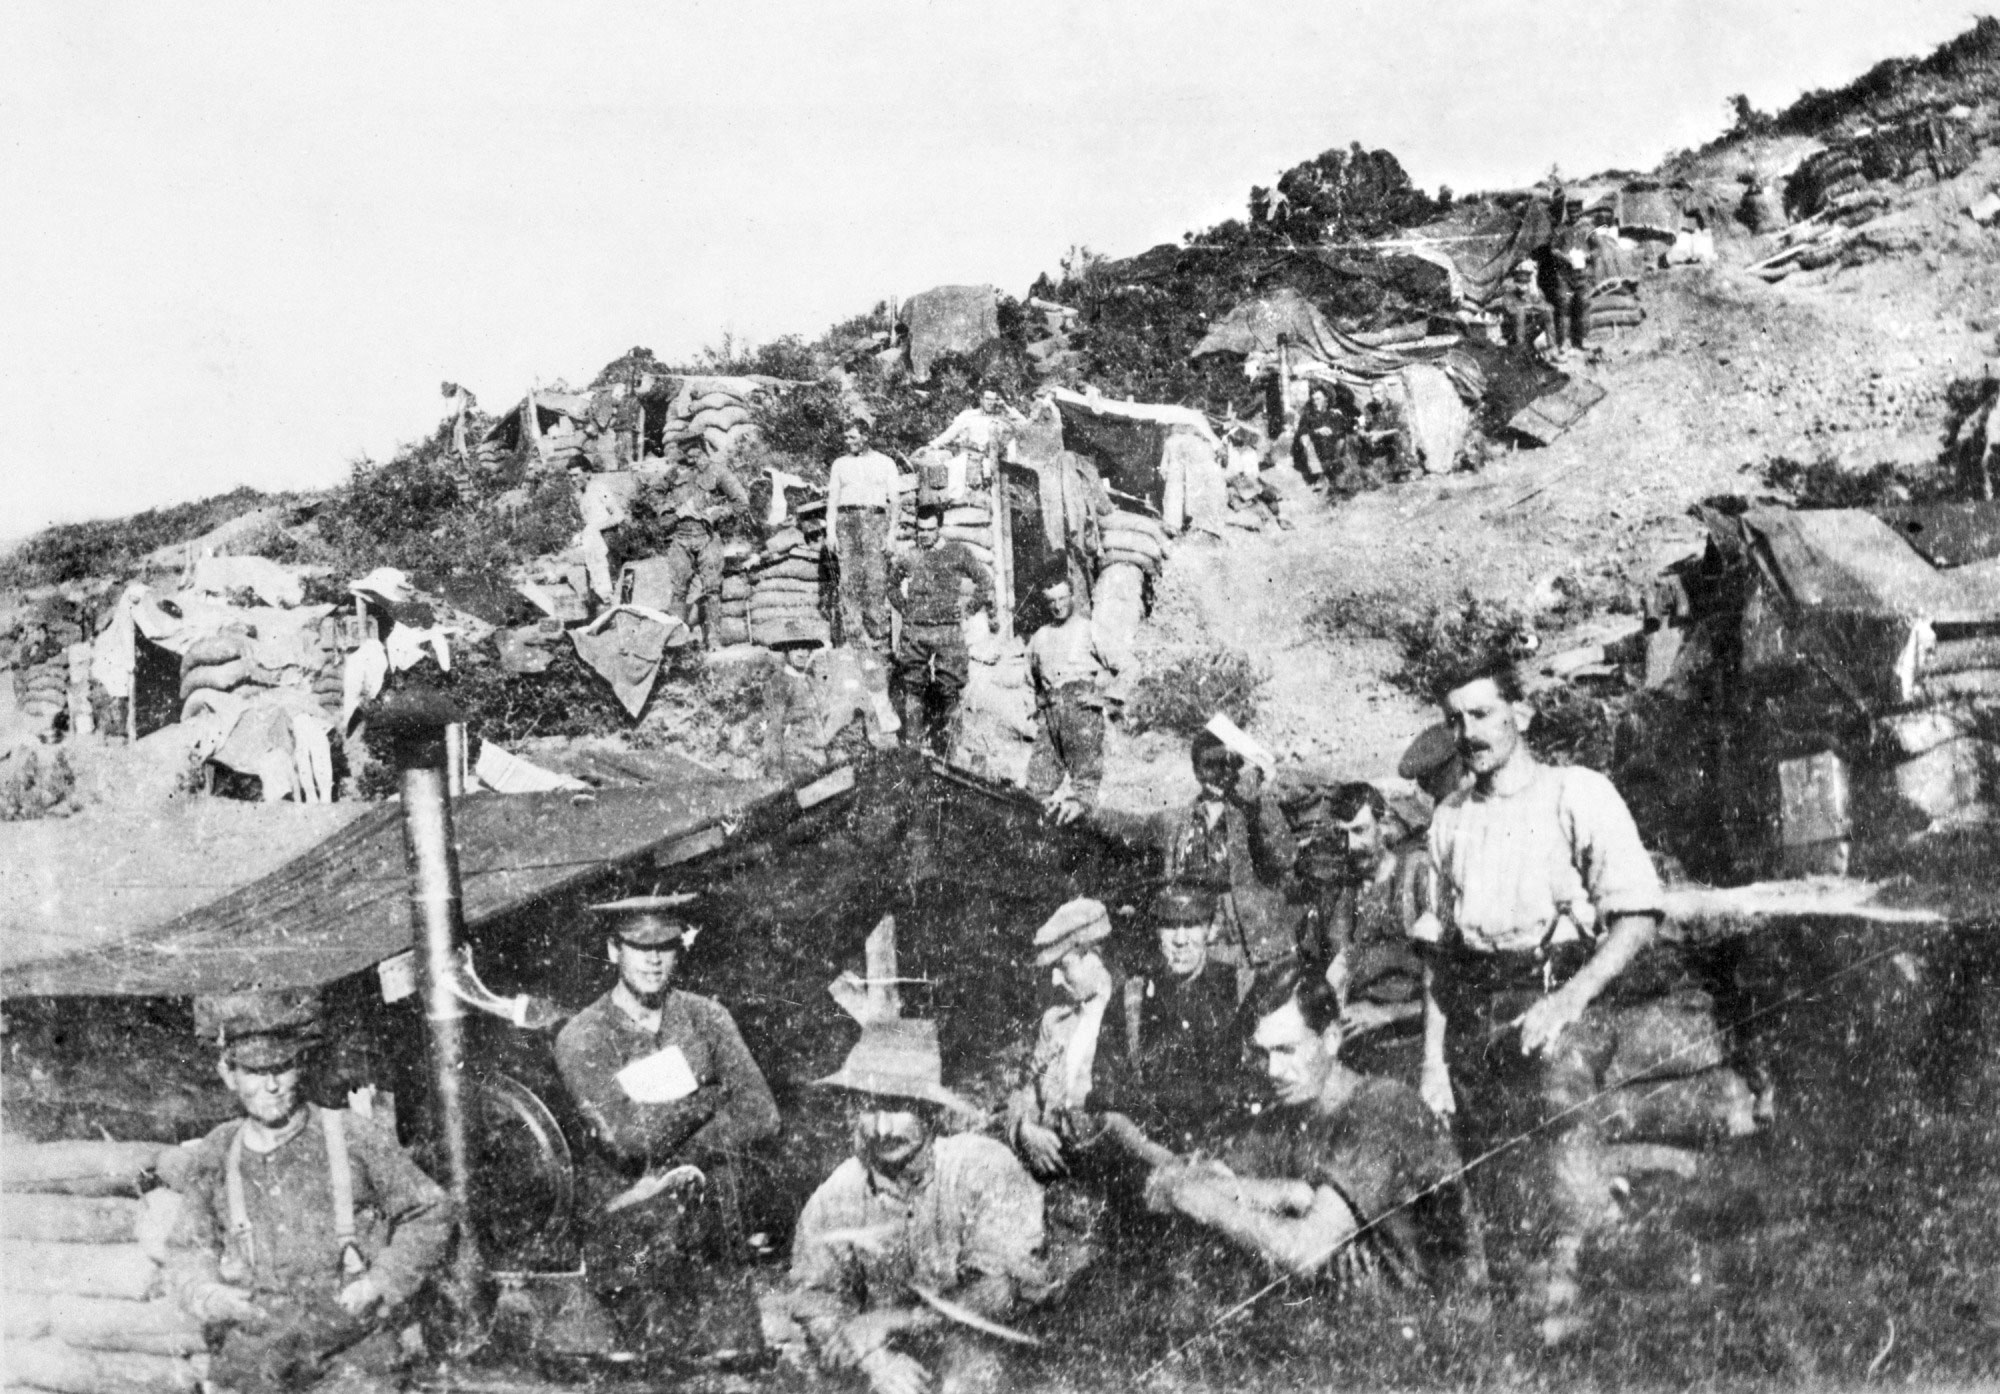 Soldiers and their dugouts, Gallipoli, 1915.